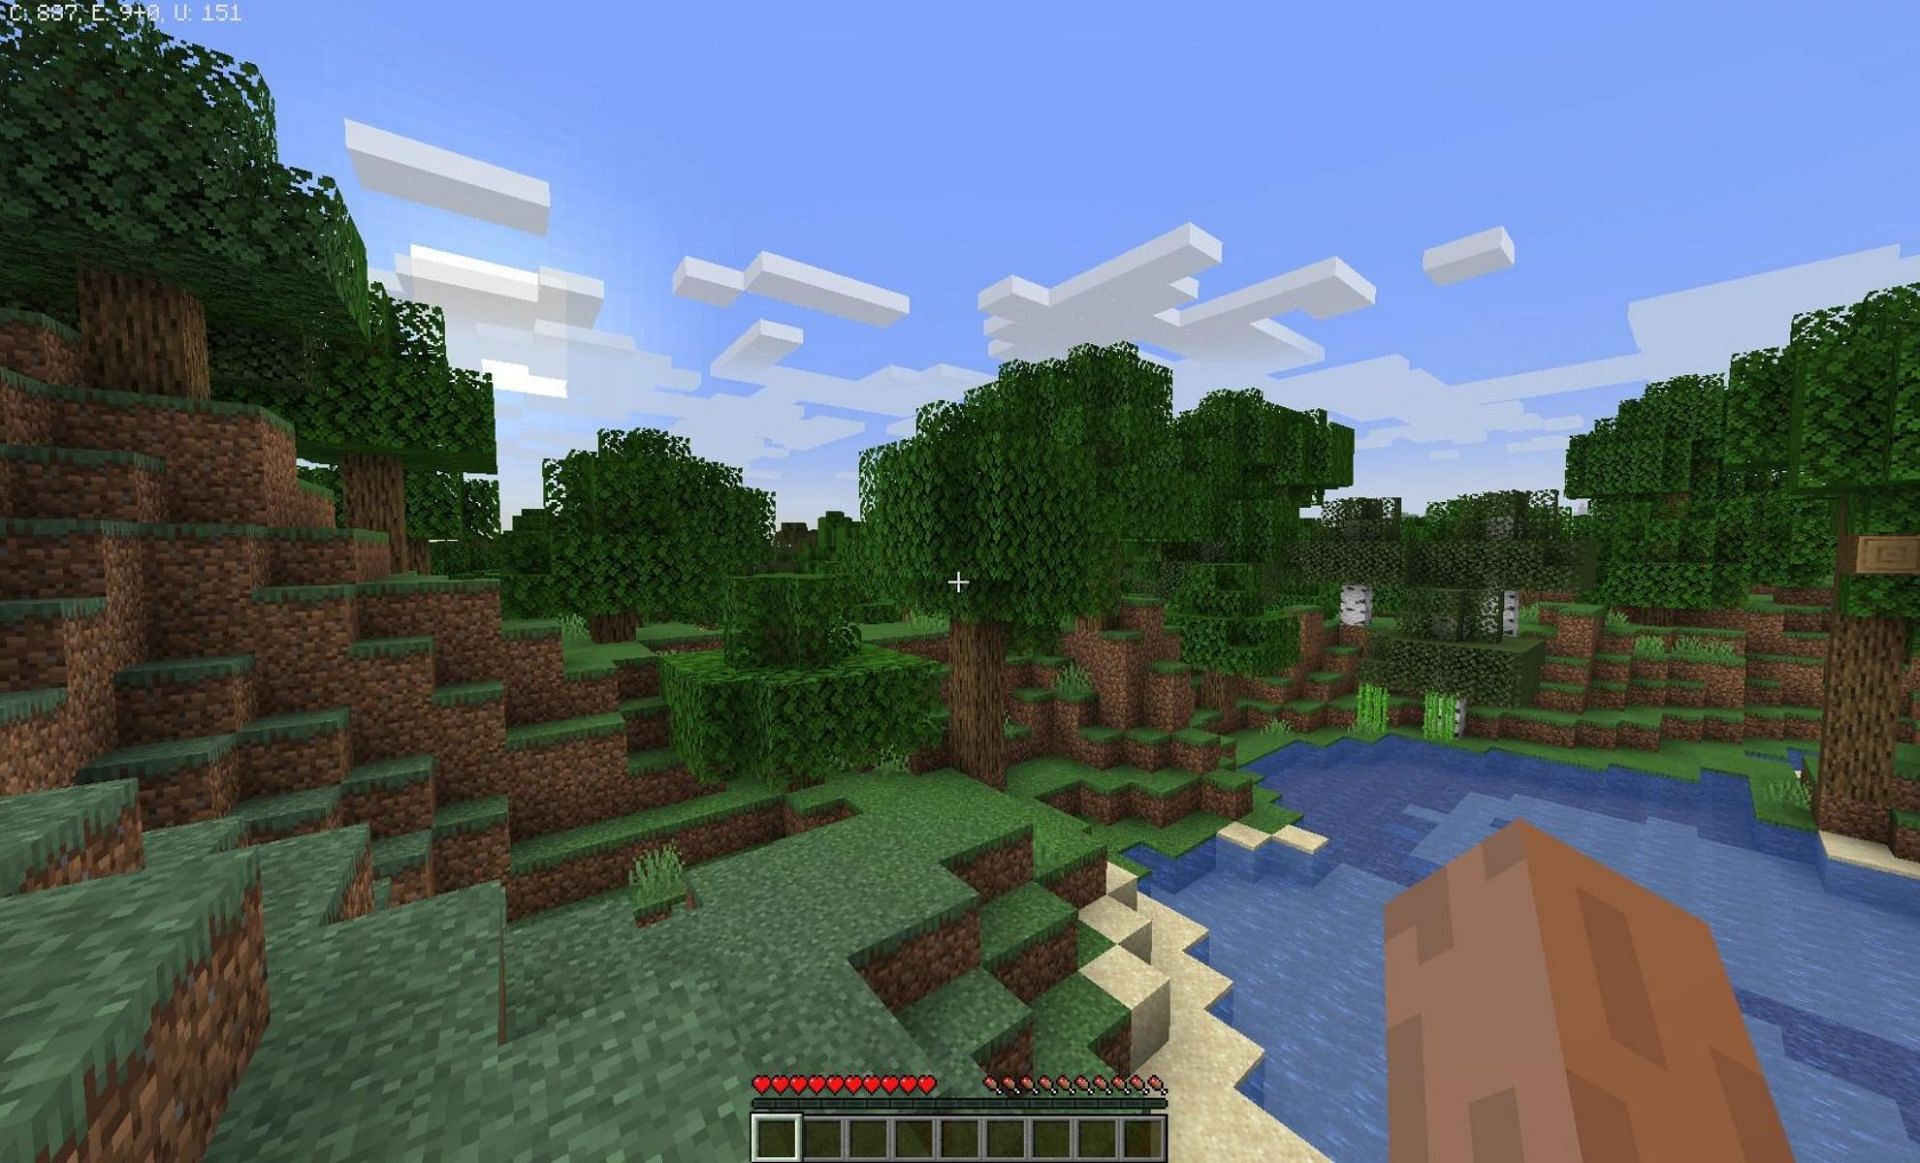 The game can be played in Virtual Reality (Image via Minecraft Wiki)